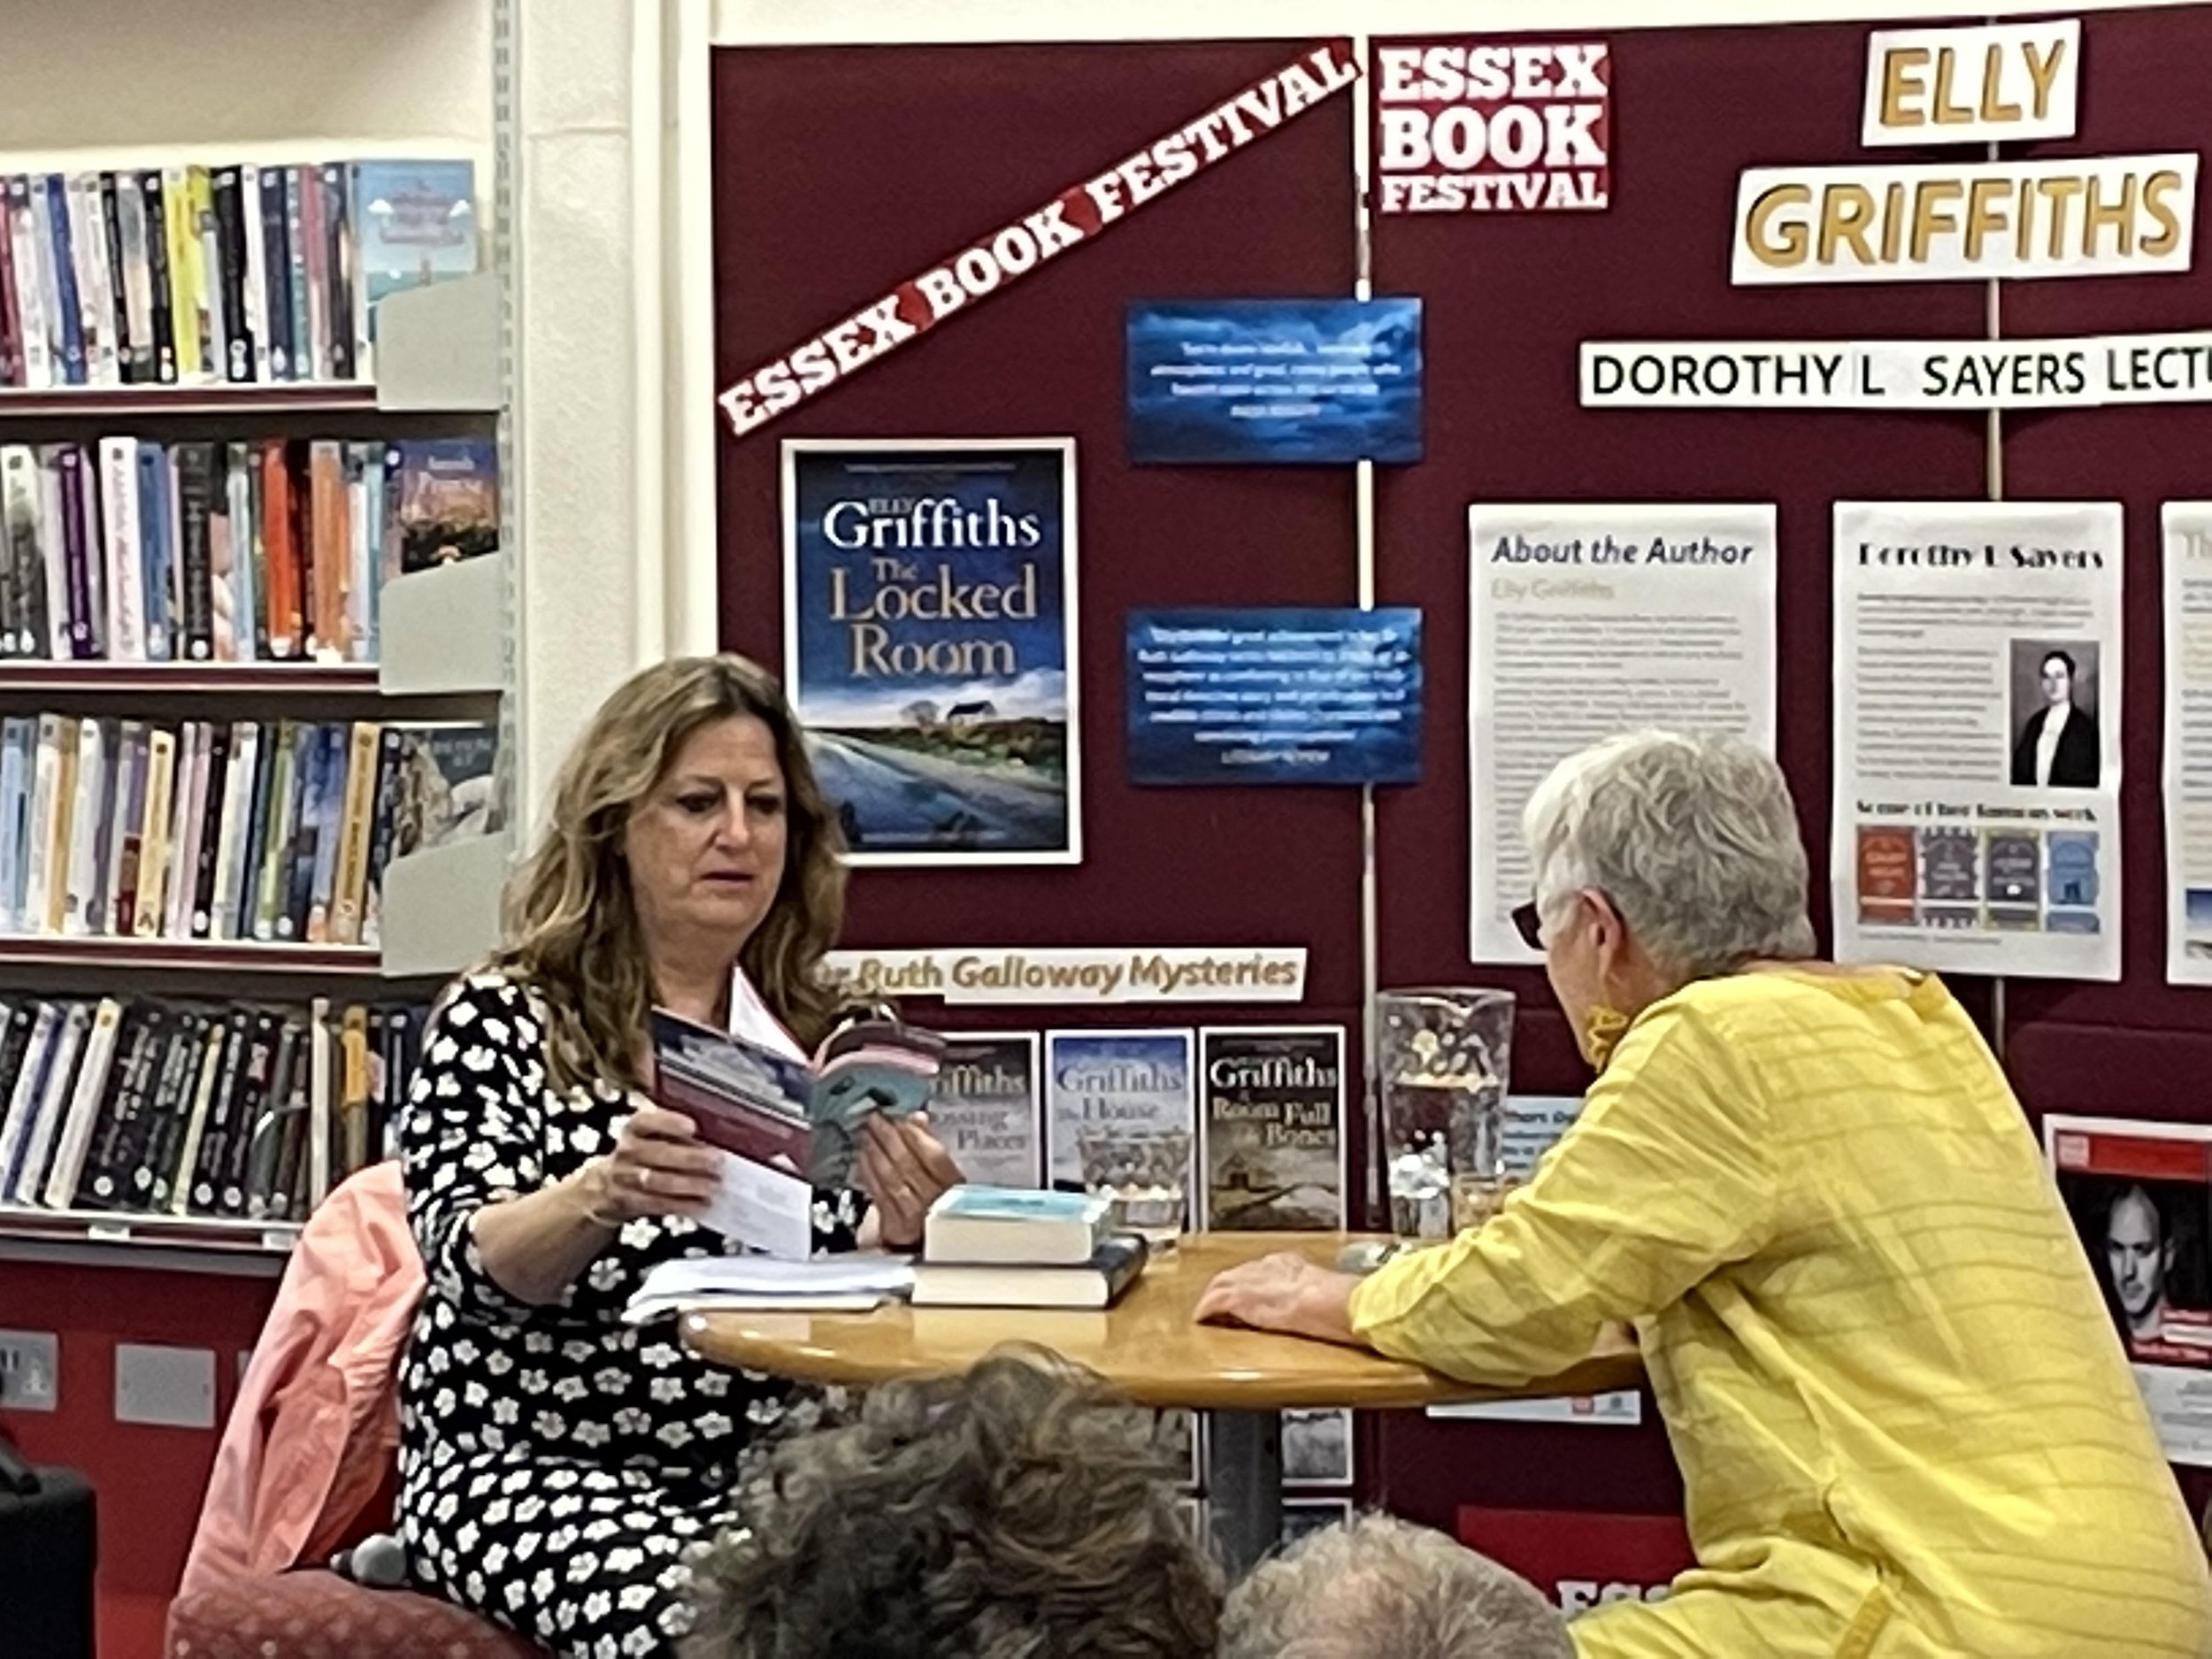 Elly Griffiths with Seona Ford at the Essex Book Festival